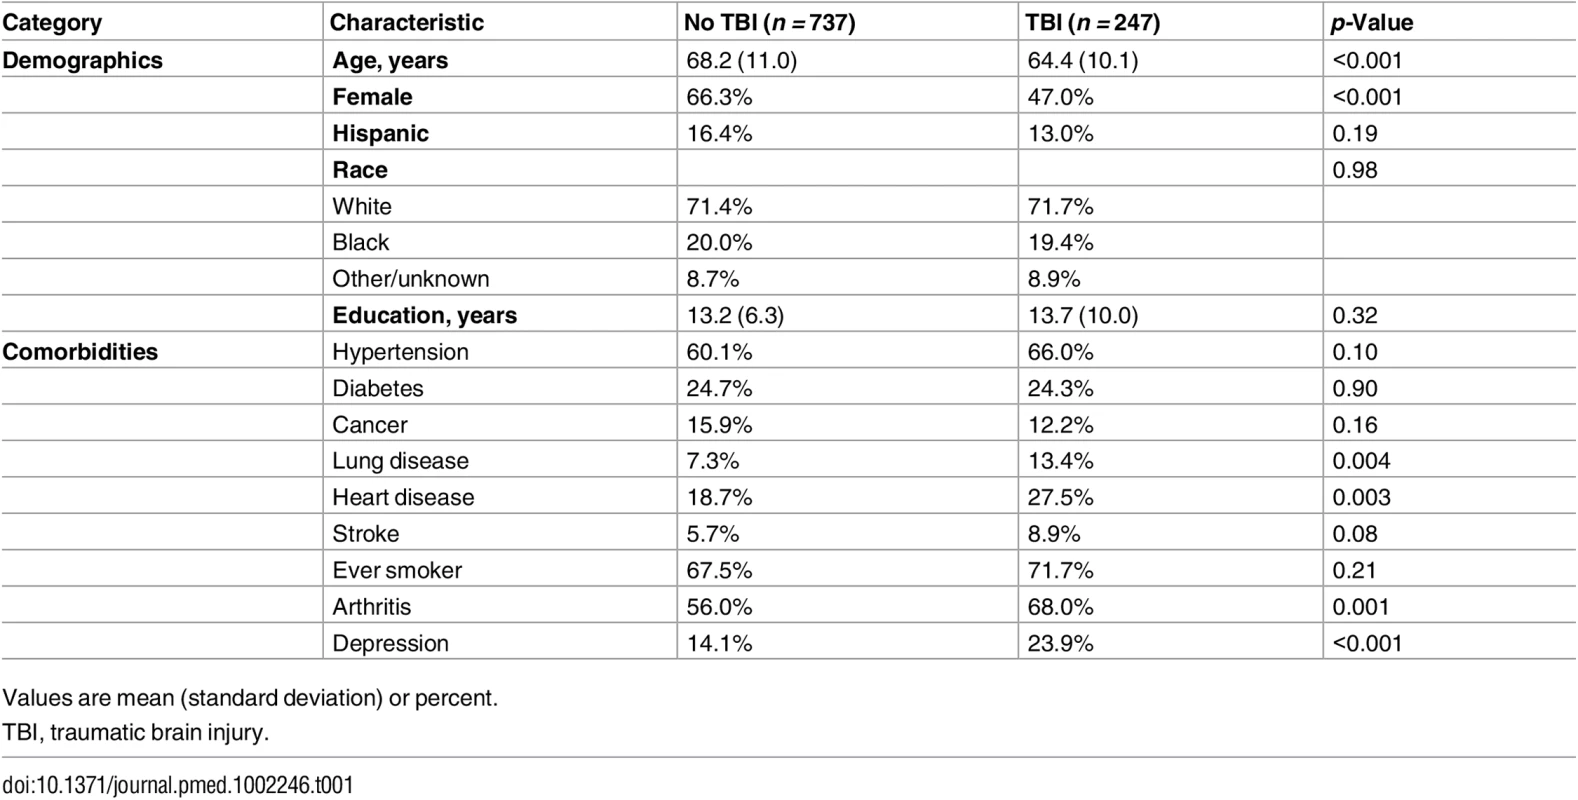 Characteristics of respondents with and without traumatic brain injury.